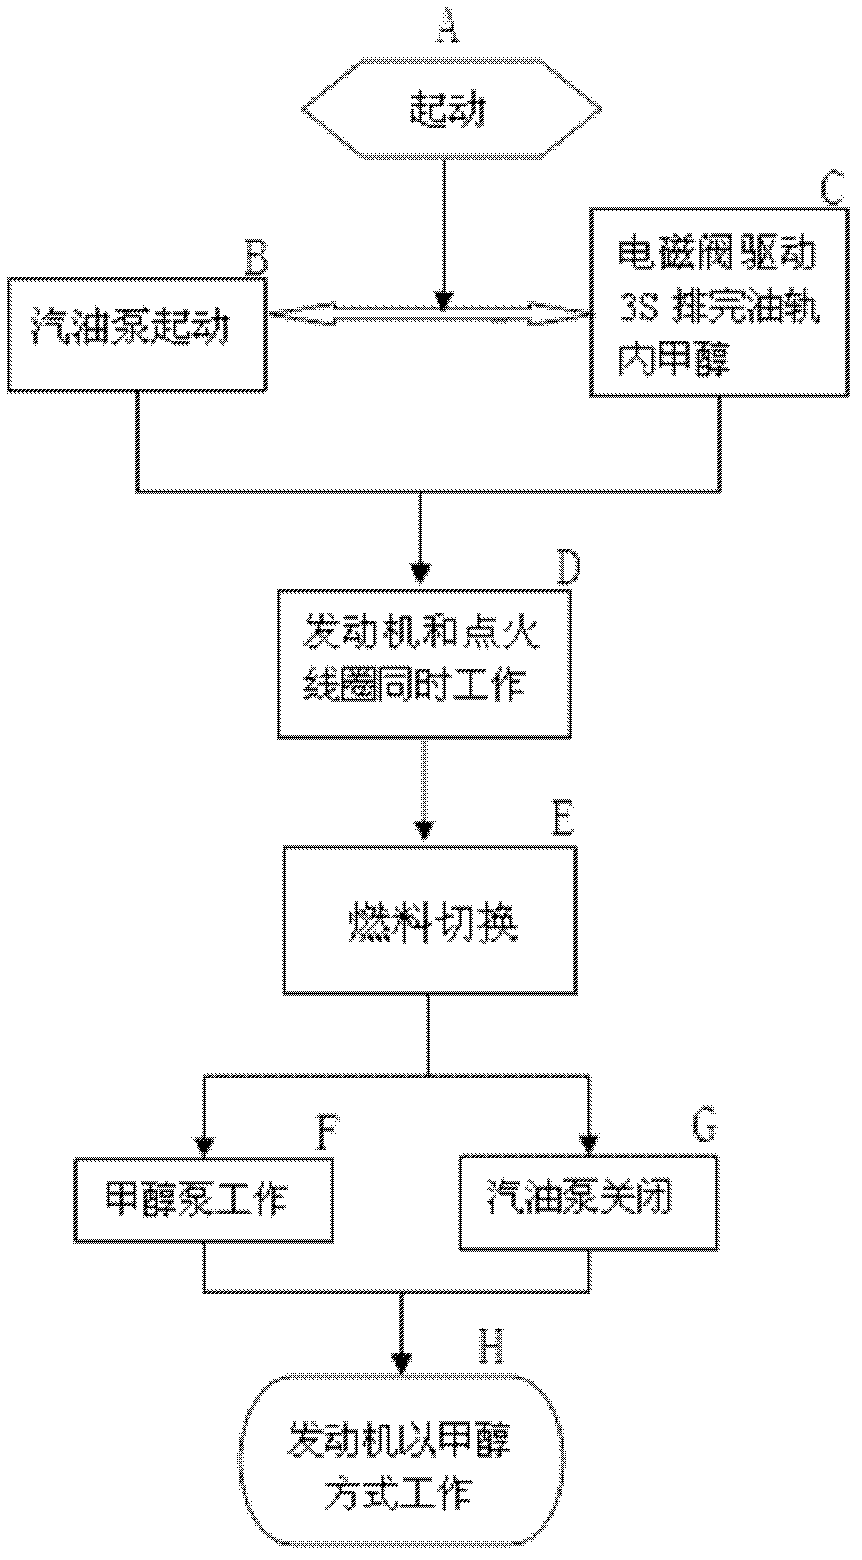 Automobile dual-fuel supply system based on single fuel rail and single fuel injector set